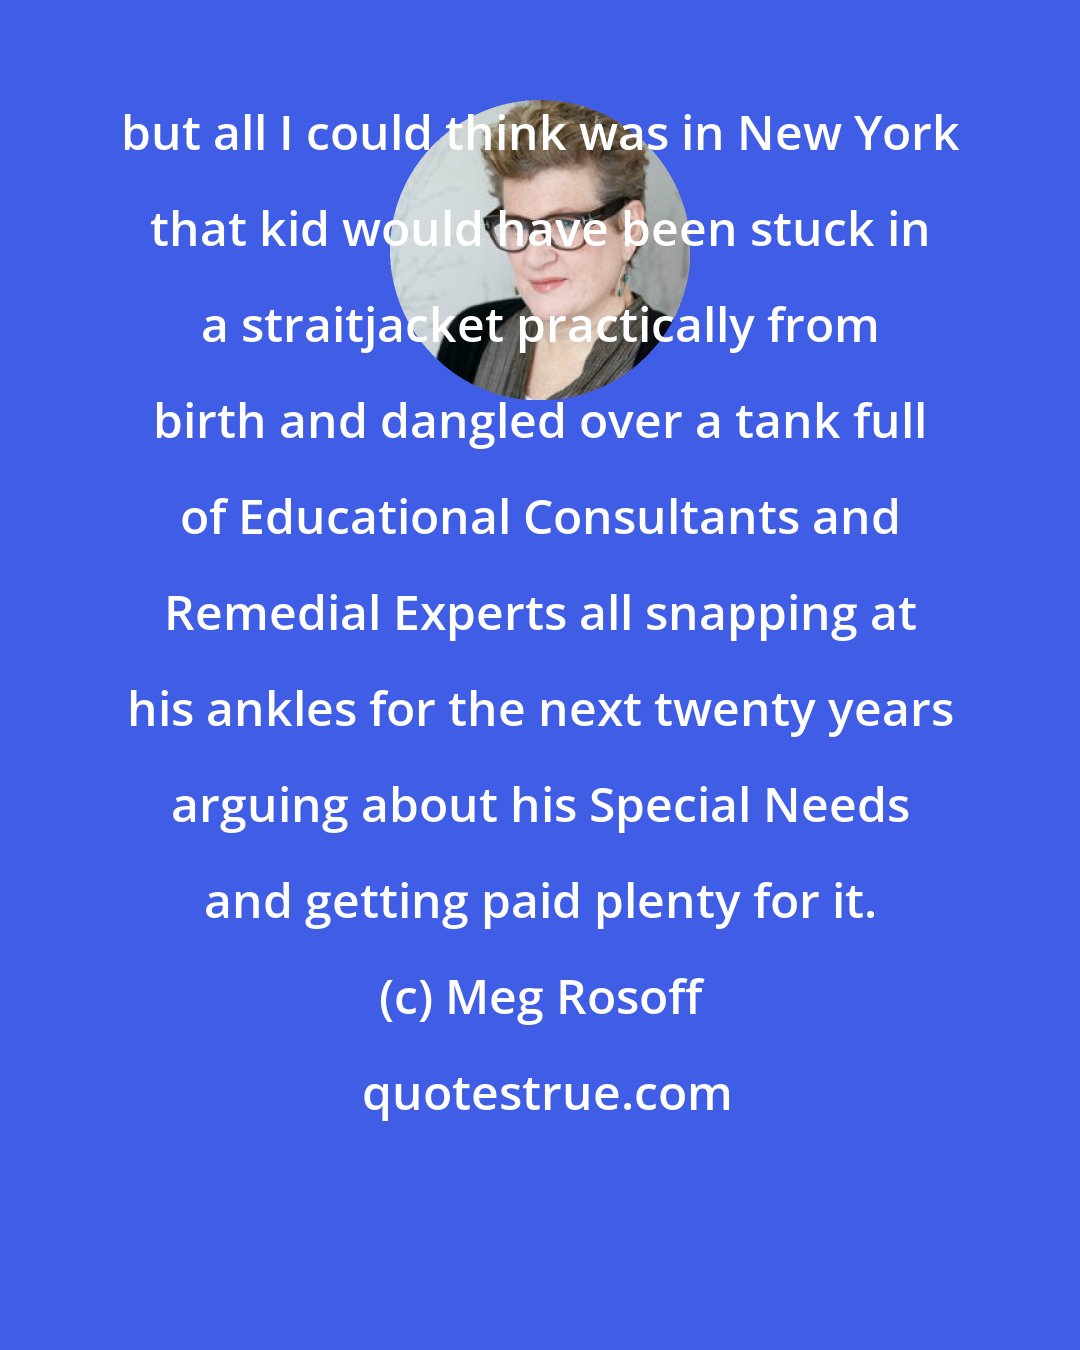 Meg Rosoff: but all I could think was in New York that kid would have been stuck in a straitjacket practically from birth and dangled over a tank full of Educational Consultants and Remedial Experts all snapping at his ankles for the next twenty years arguing about his Special Needs and getting paid plenty for it.